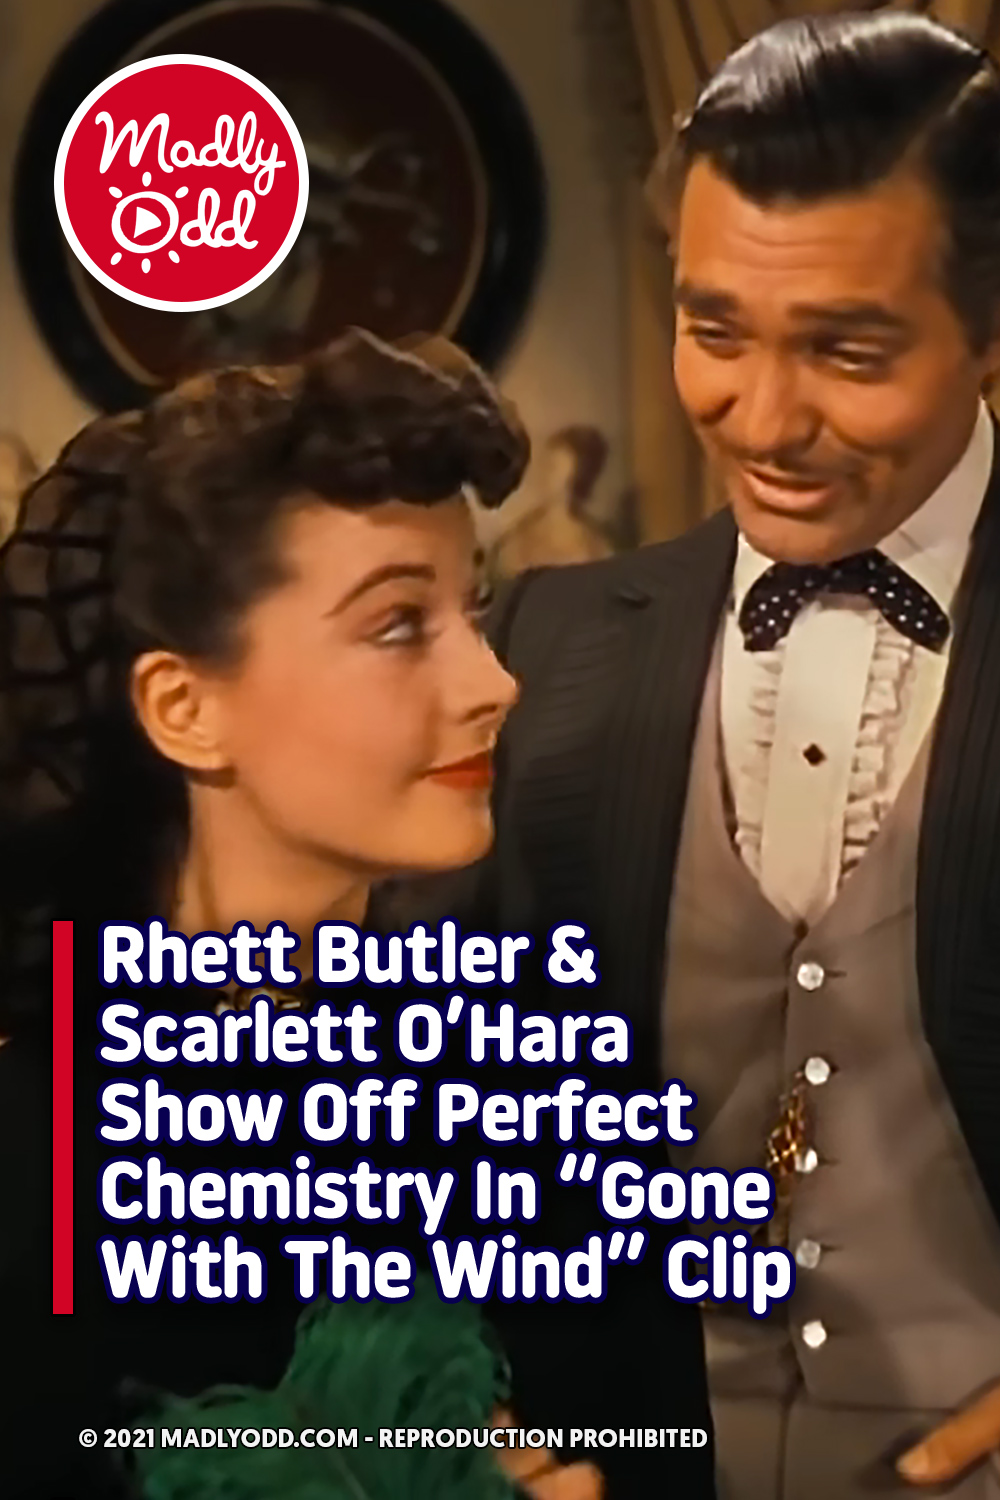 Rhett Butler & Scarlett O\'Hara Show Off Perfect Chemistry In “Gone With The Wind” Clip